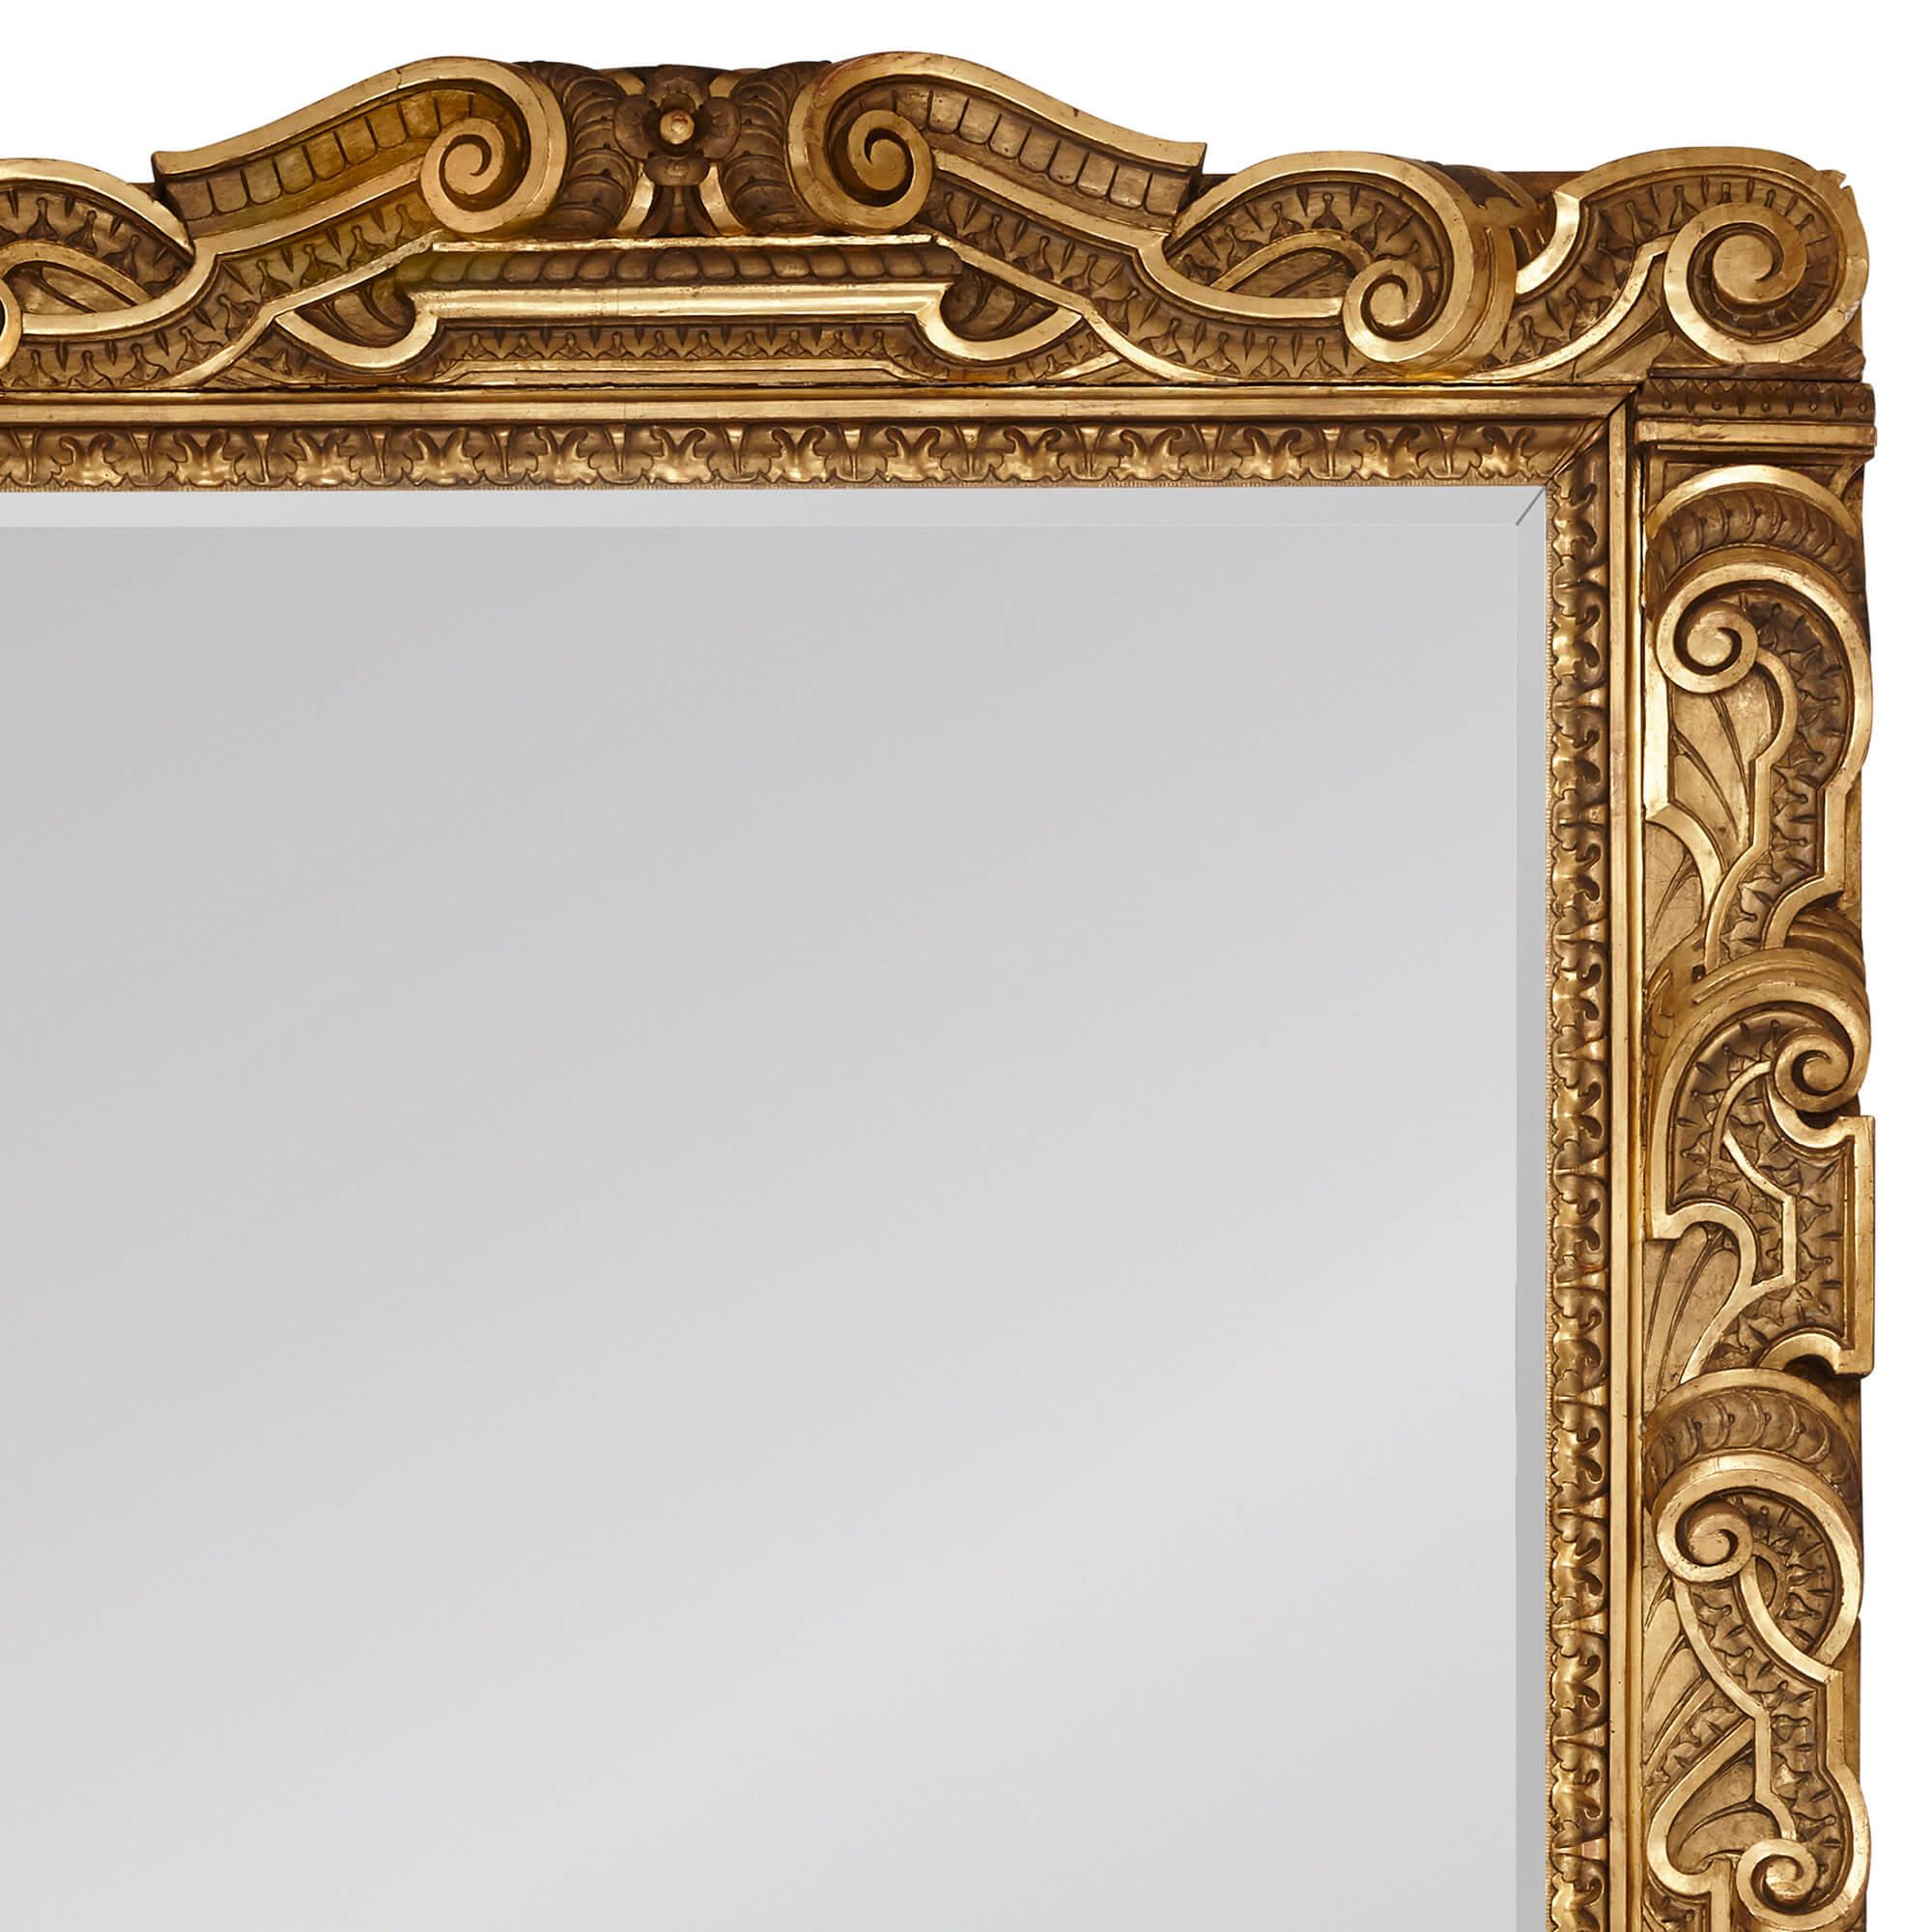 Very large Italian giltwood mirror carved in the Baroque style
Italian, 19th Century
Height 254cm, width 168cm, depth 11cm

This very large giltwood wall mirror is designed in the Italian Baroque style. The mirror features a rectangular giltwood